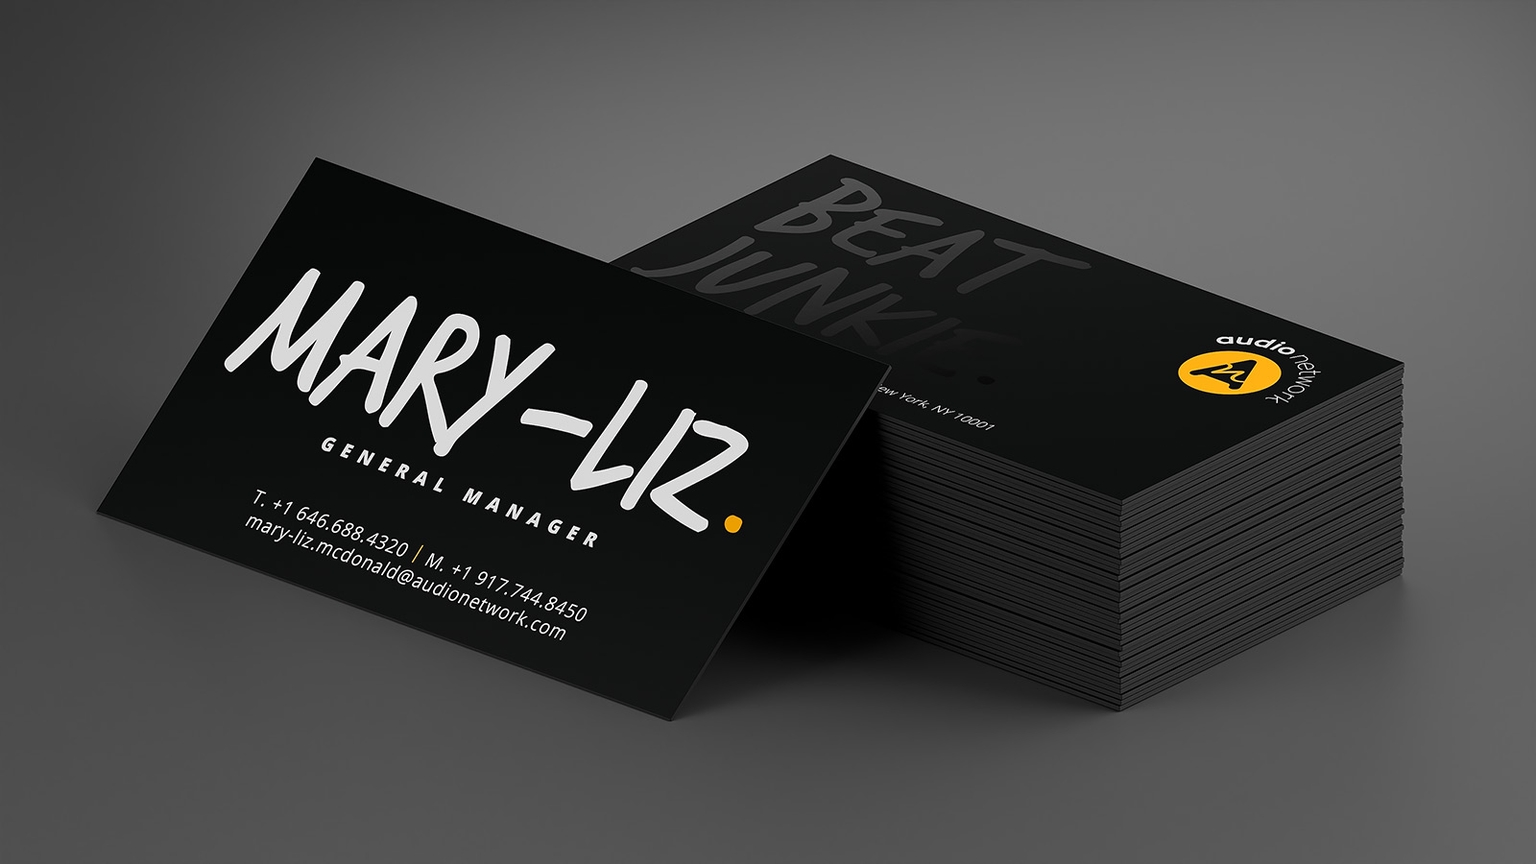 Rendering of Audio Network business card design.